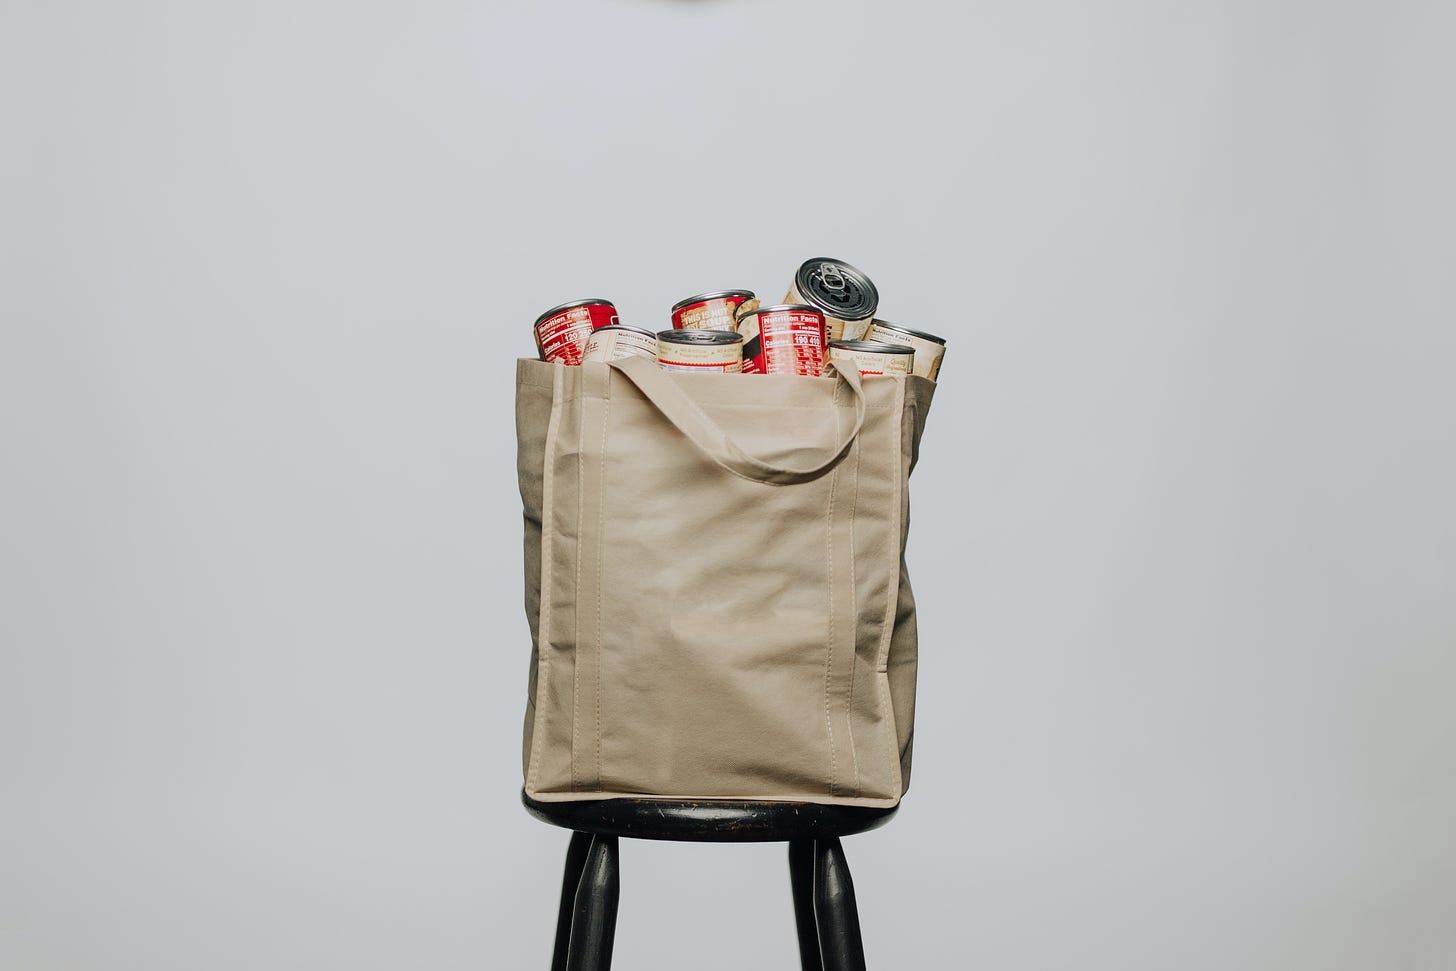 bag of canned goods on a stool